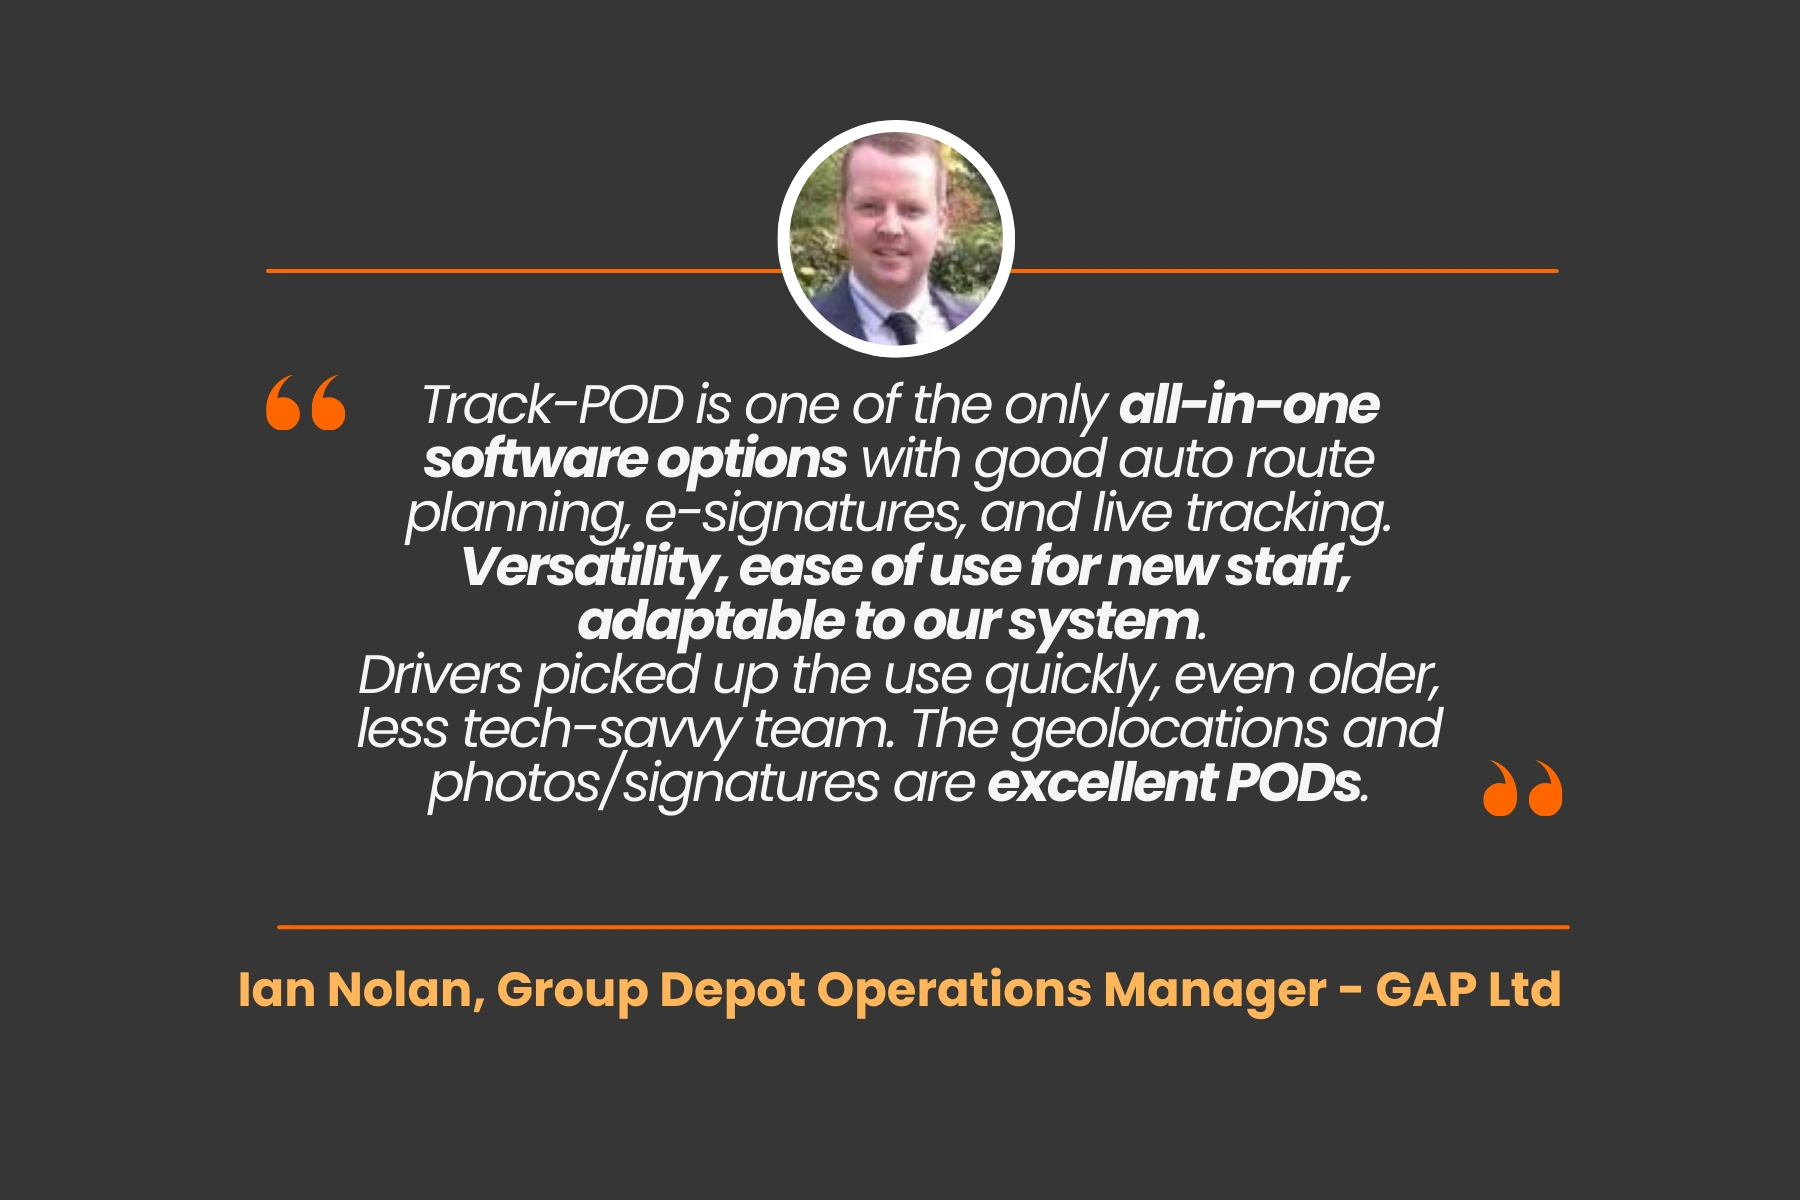 Gap Ltd boosts their wholesale operations with Track-POD's automated order routing